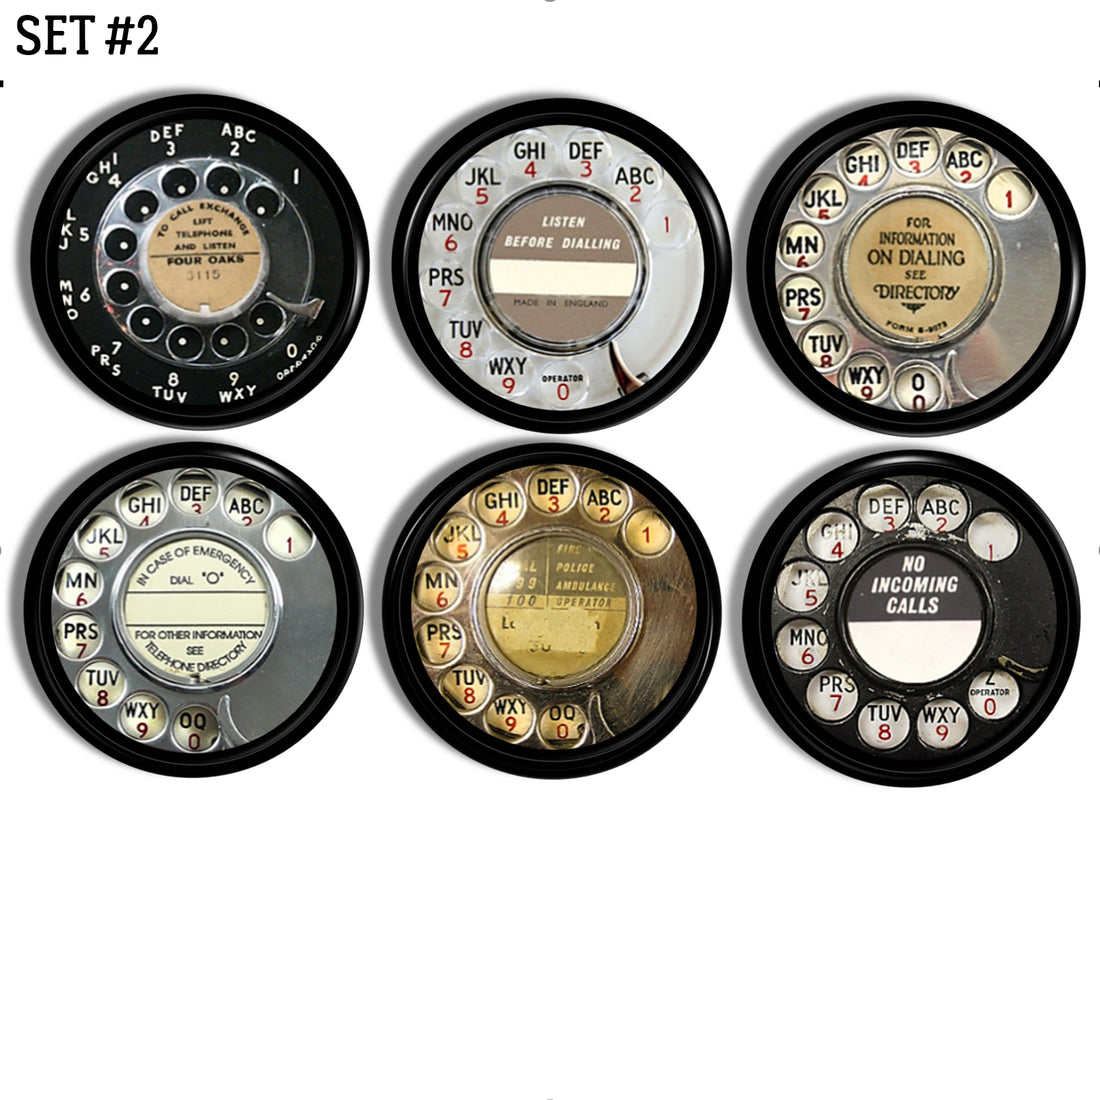 Set of 6 decorative cabinet and drawer knobs in vintage telephone dials for home and office.